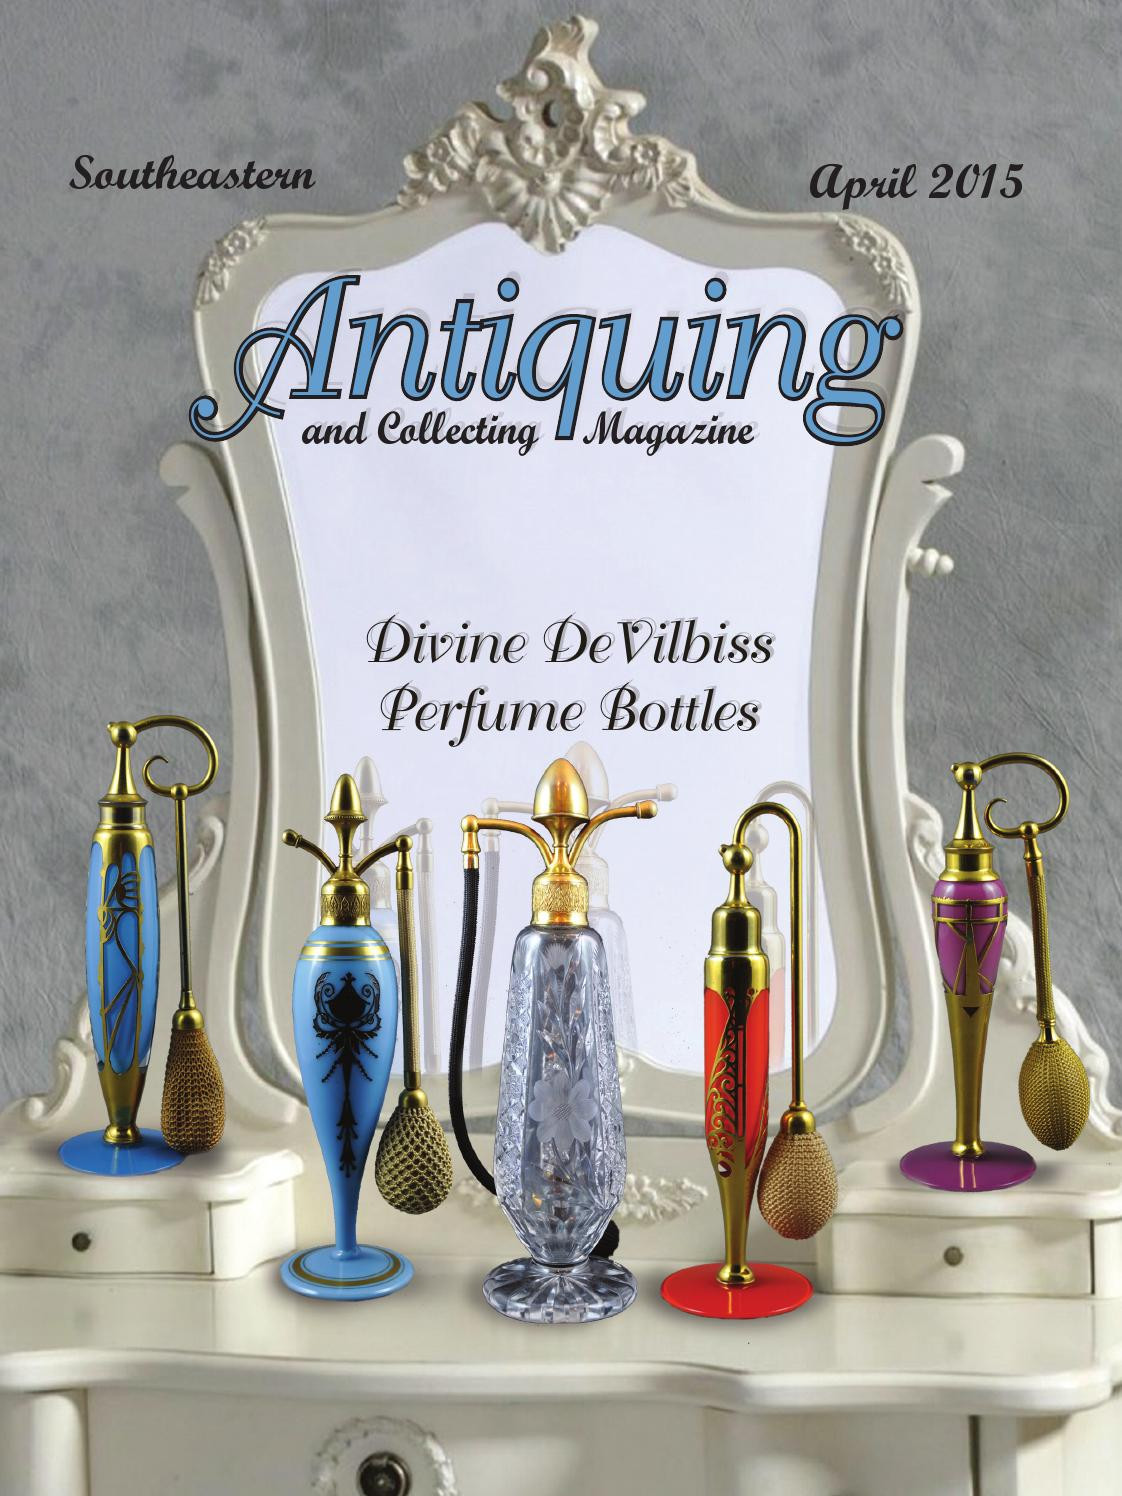 14 Ideal Antique Hammered Copper Vase 2024 free download antique hammered copper vase of southeastern antiquing and collecting magazine april 2015 by with regard to southeastern antiquing and collecting magazine april 2015 by southeastern antiquin